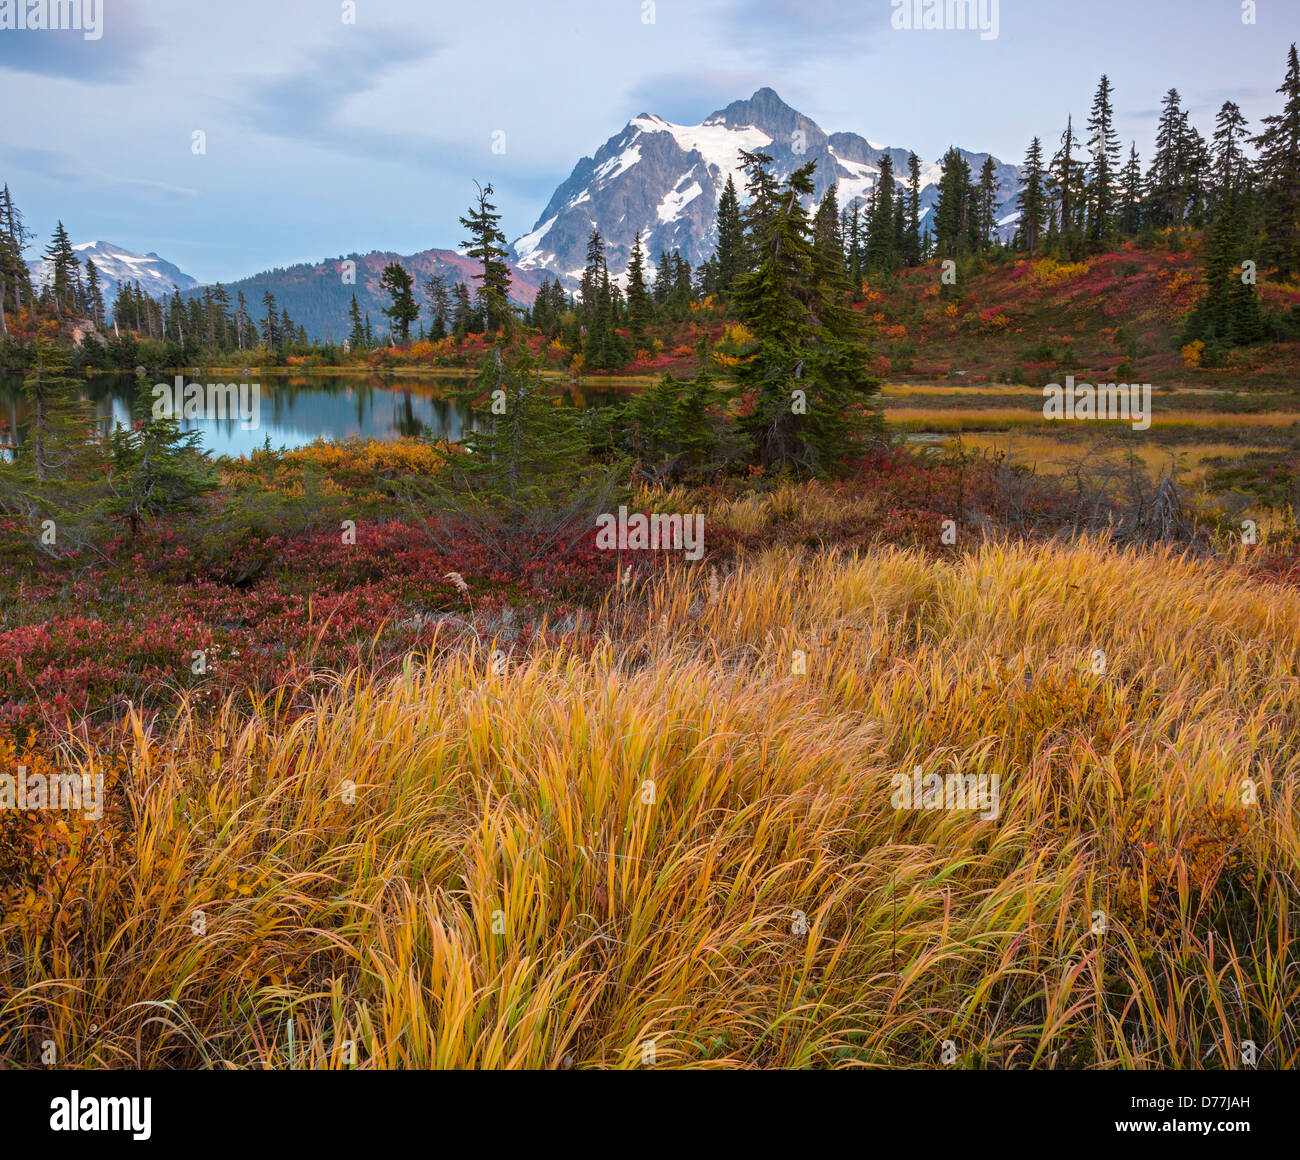 Mount Baker-Snoqualmie National Forest, WA: Grasses and huckleberries in fall color at Picture Lake with Mount Shuksan at dusk Stock Photo